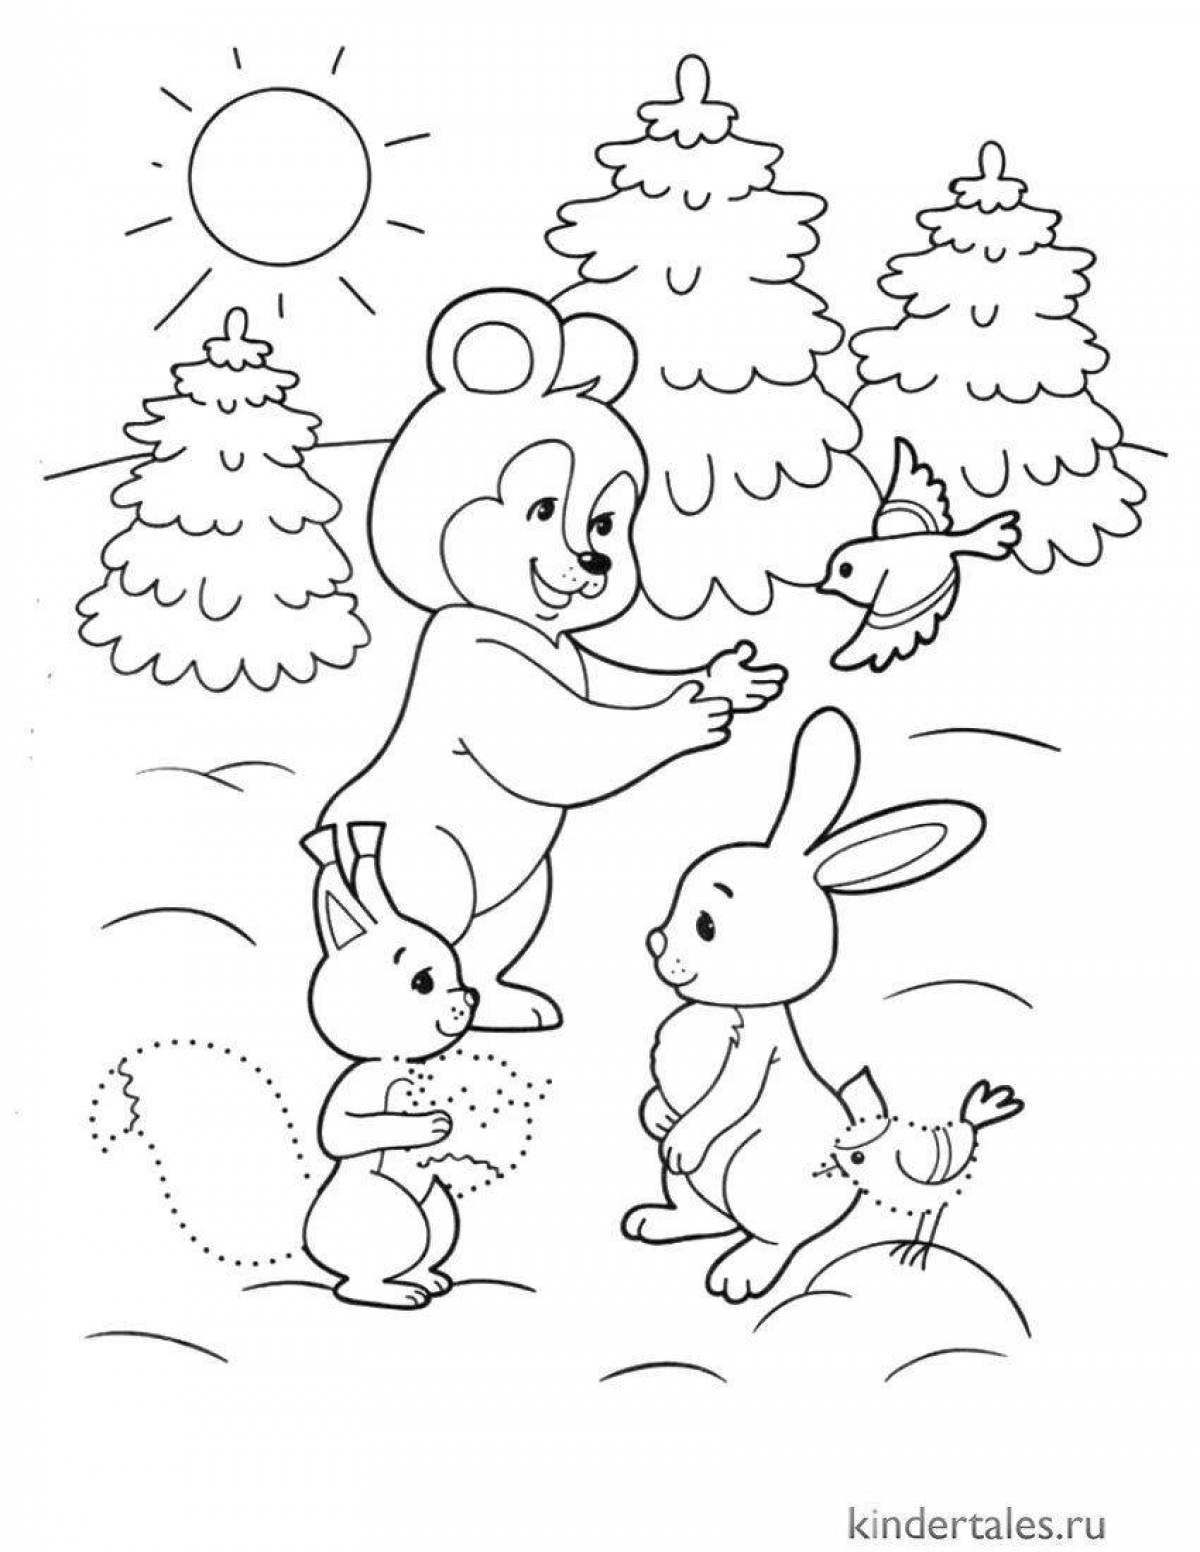 Fabulous winter animals coloring book for 3-4 year olds